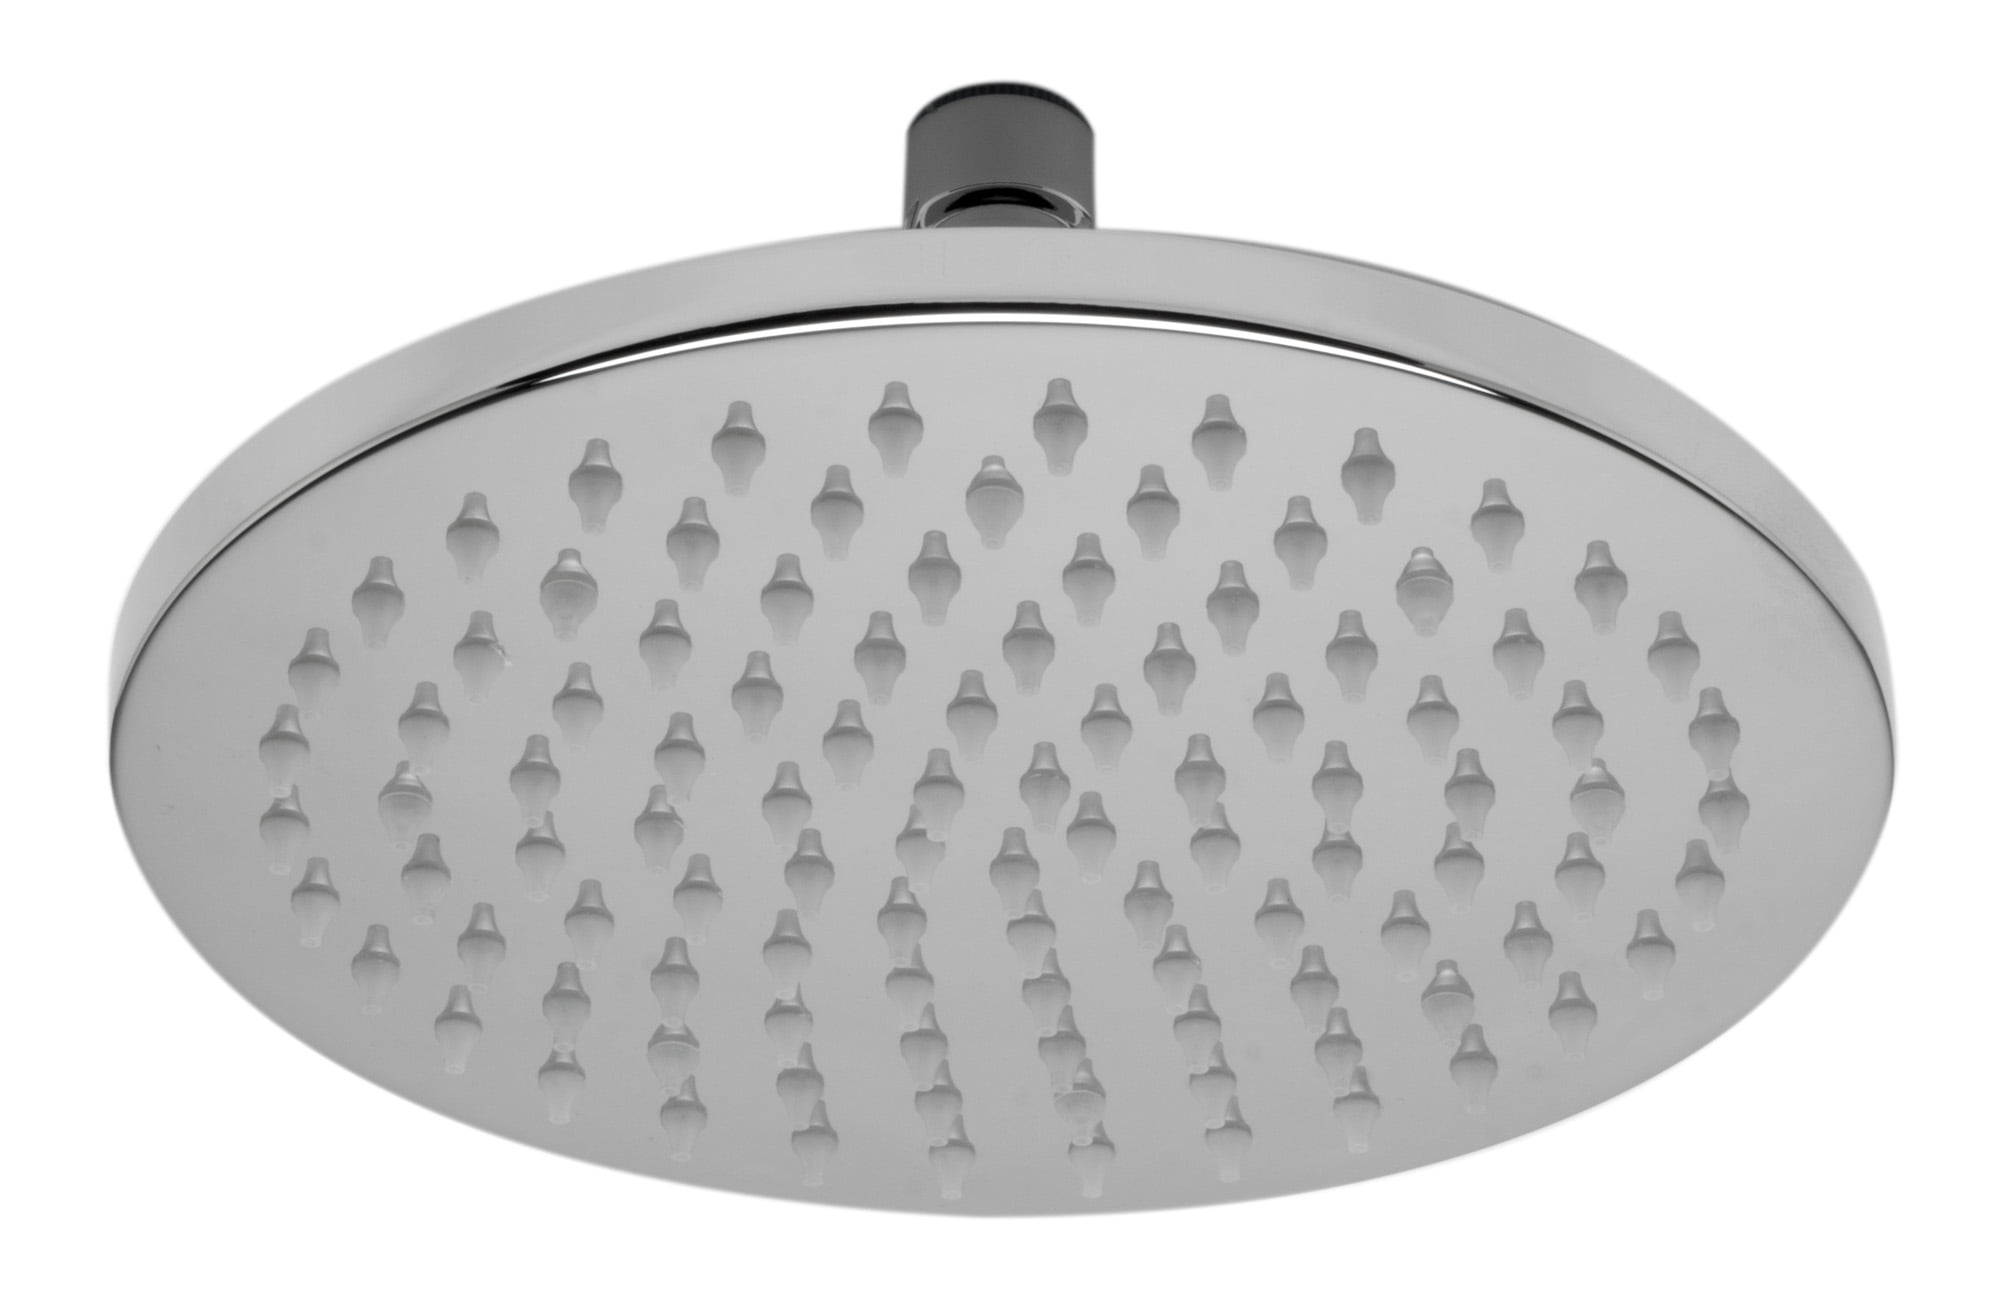 Picture of ALFI brand LED8R - PC 8 in. Round LED Rain Shower Head - Polished Chrome, Multi Color